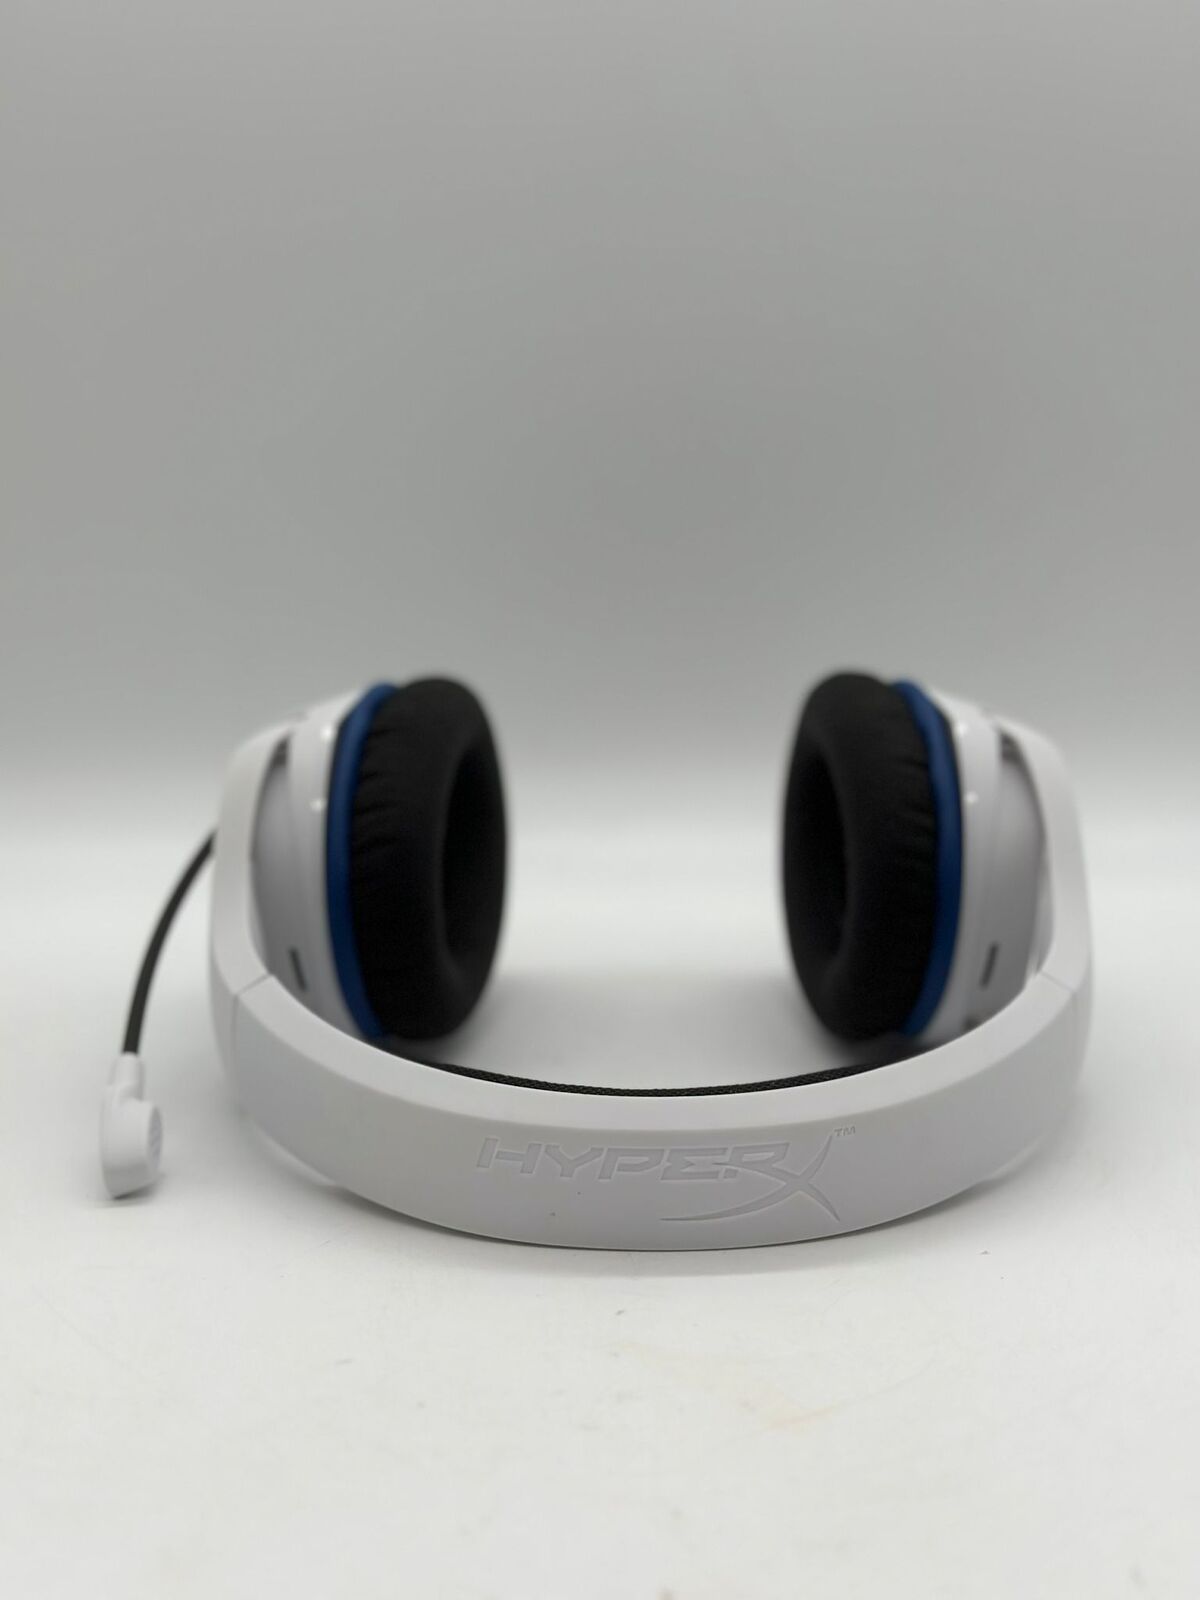 Stinger Cloud (Pre-Owned) Gaming Wireless HyperX Core Headset White